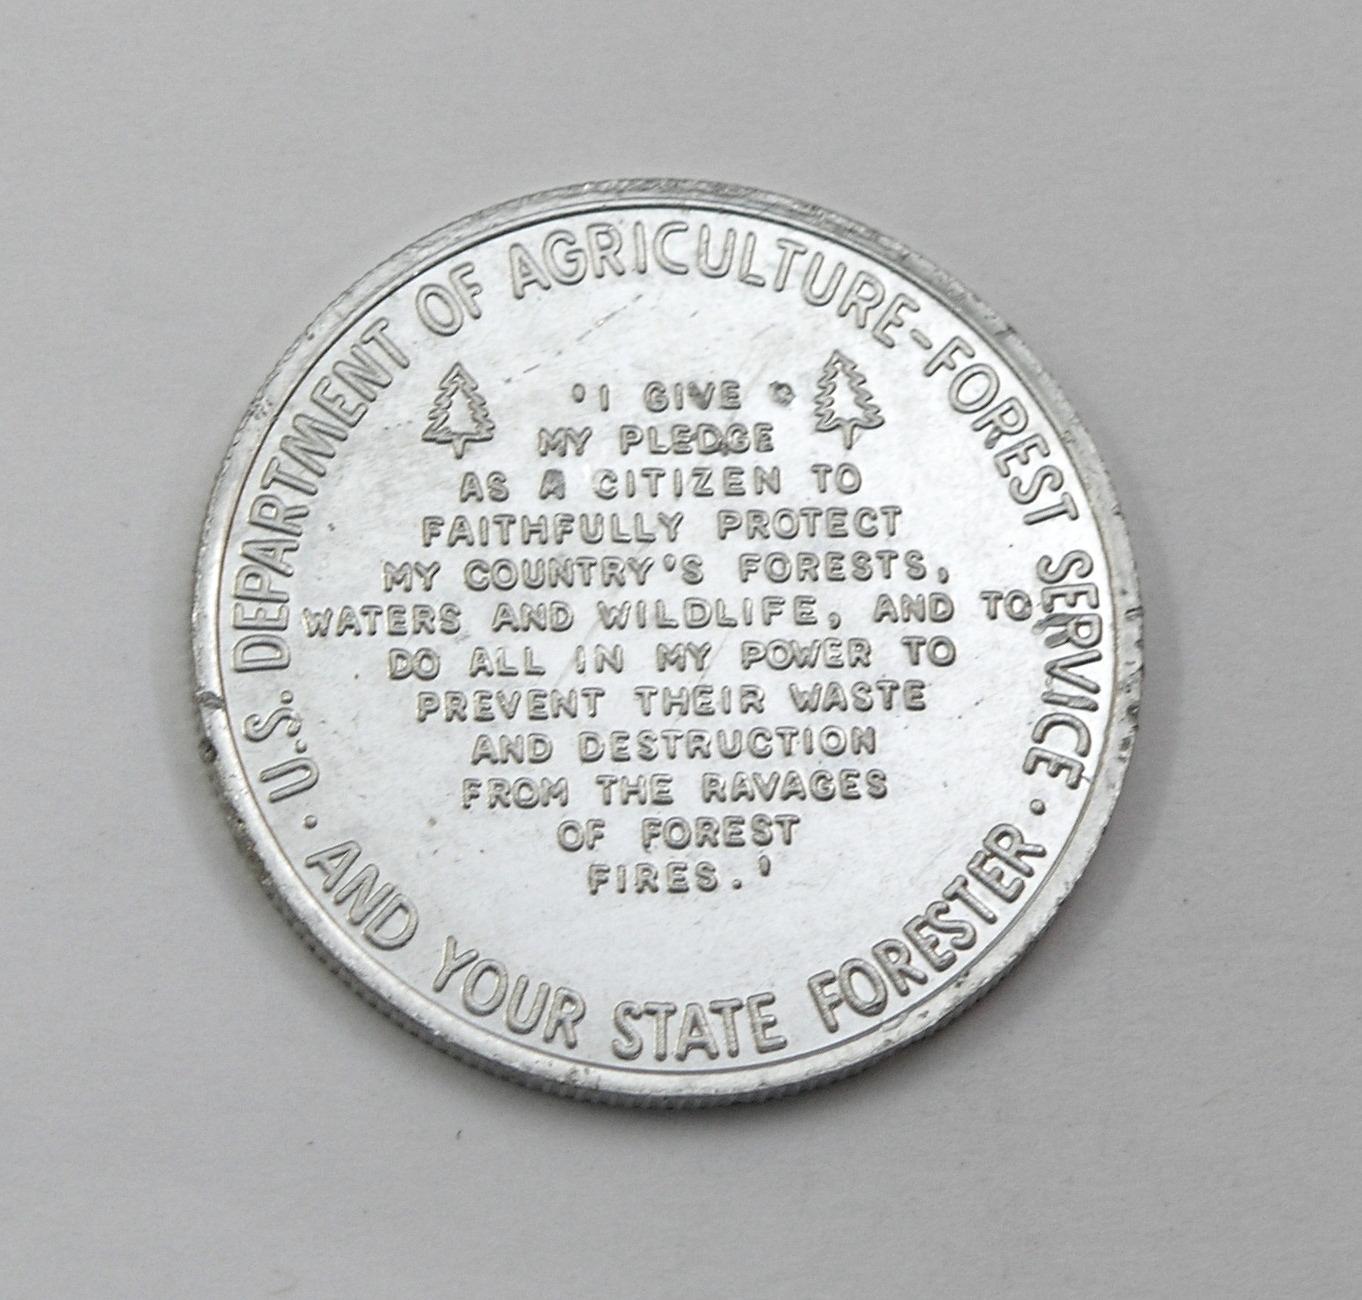 Smokey Bear "Only You Can Prevent Forest Fires" Coin/Token. US Department o